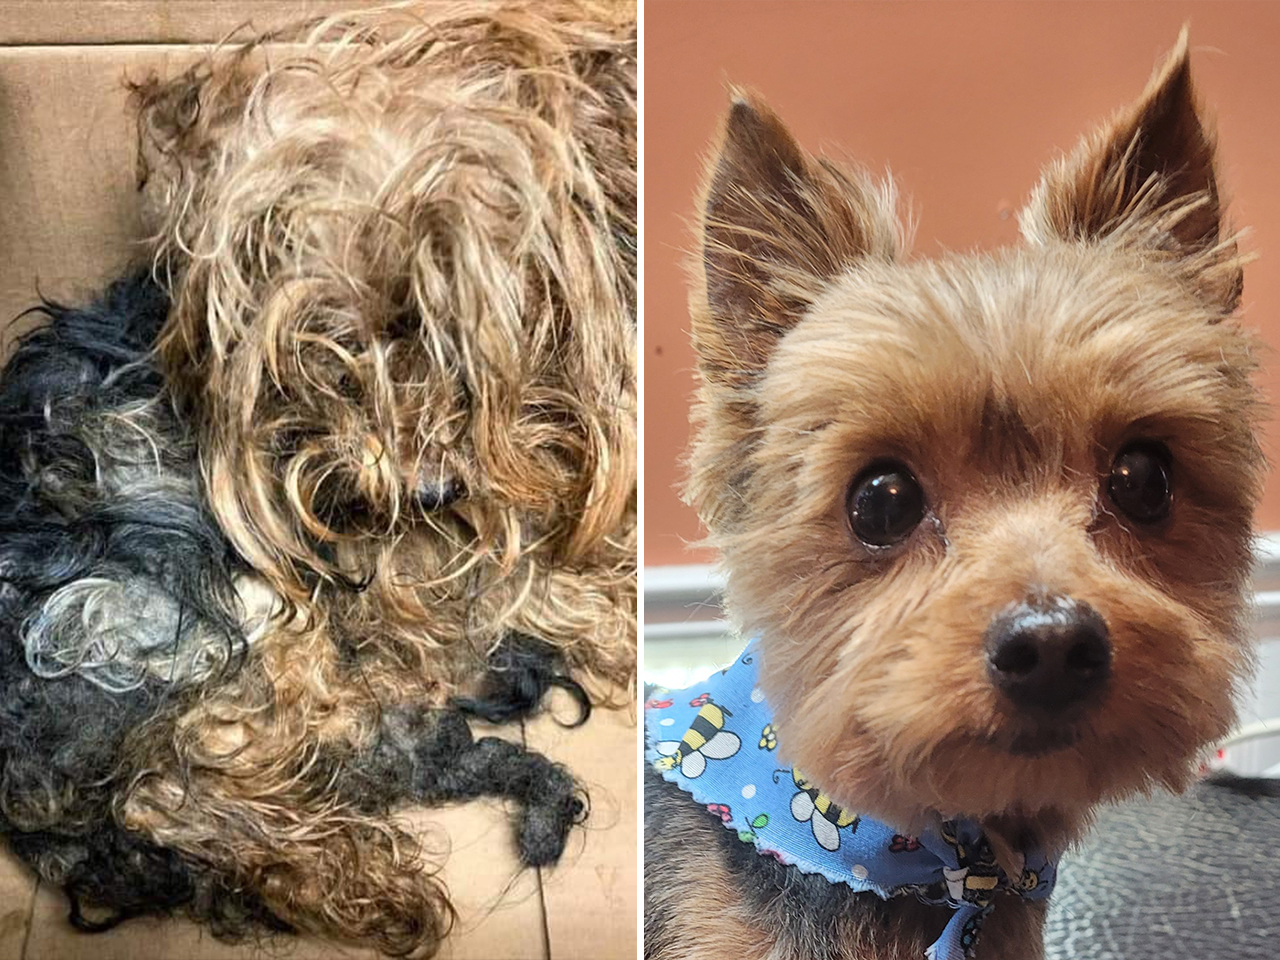 Flynn was found in a box. He was so matted rescuers could hardly tell his head from his tail. He also had a broken leg, but fortunately, he recovered and was adopted by a shelter volunteer.